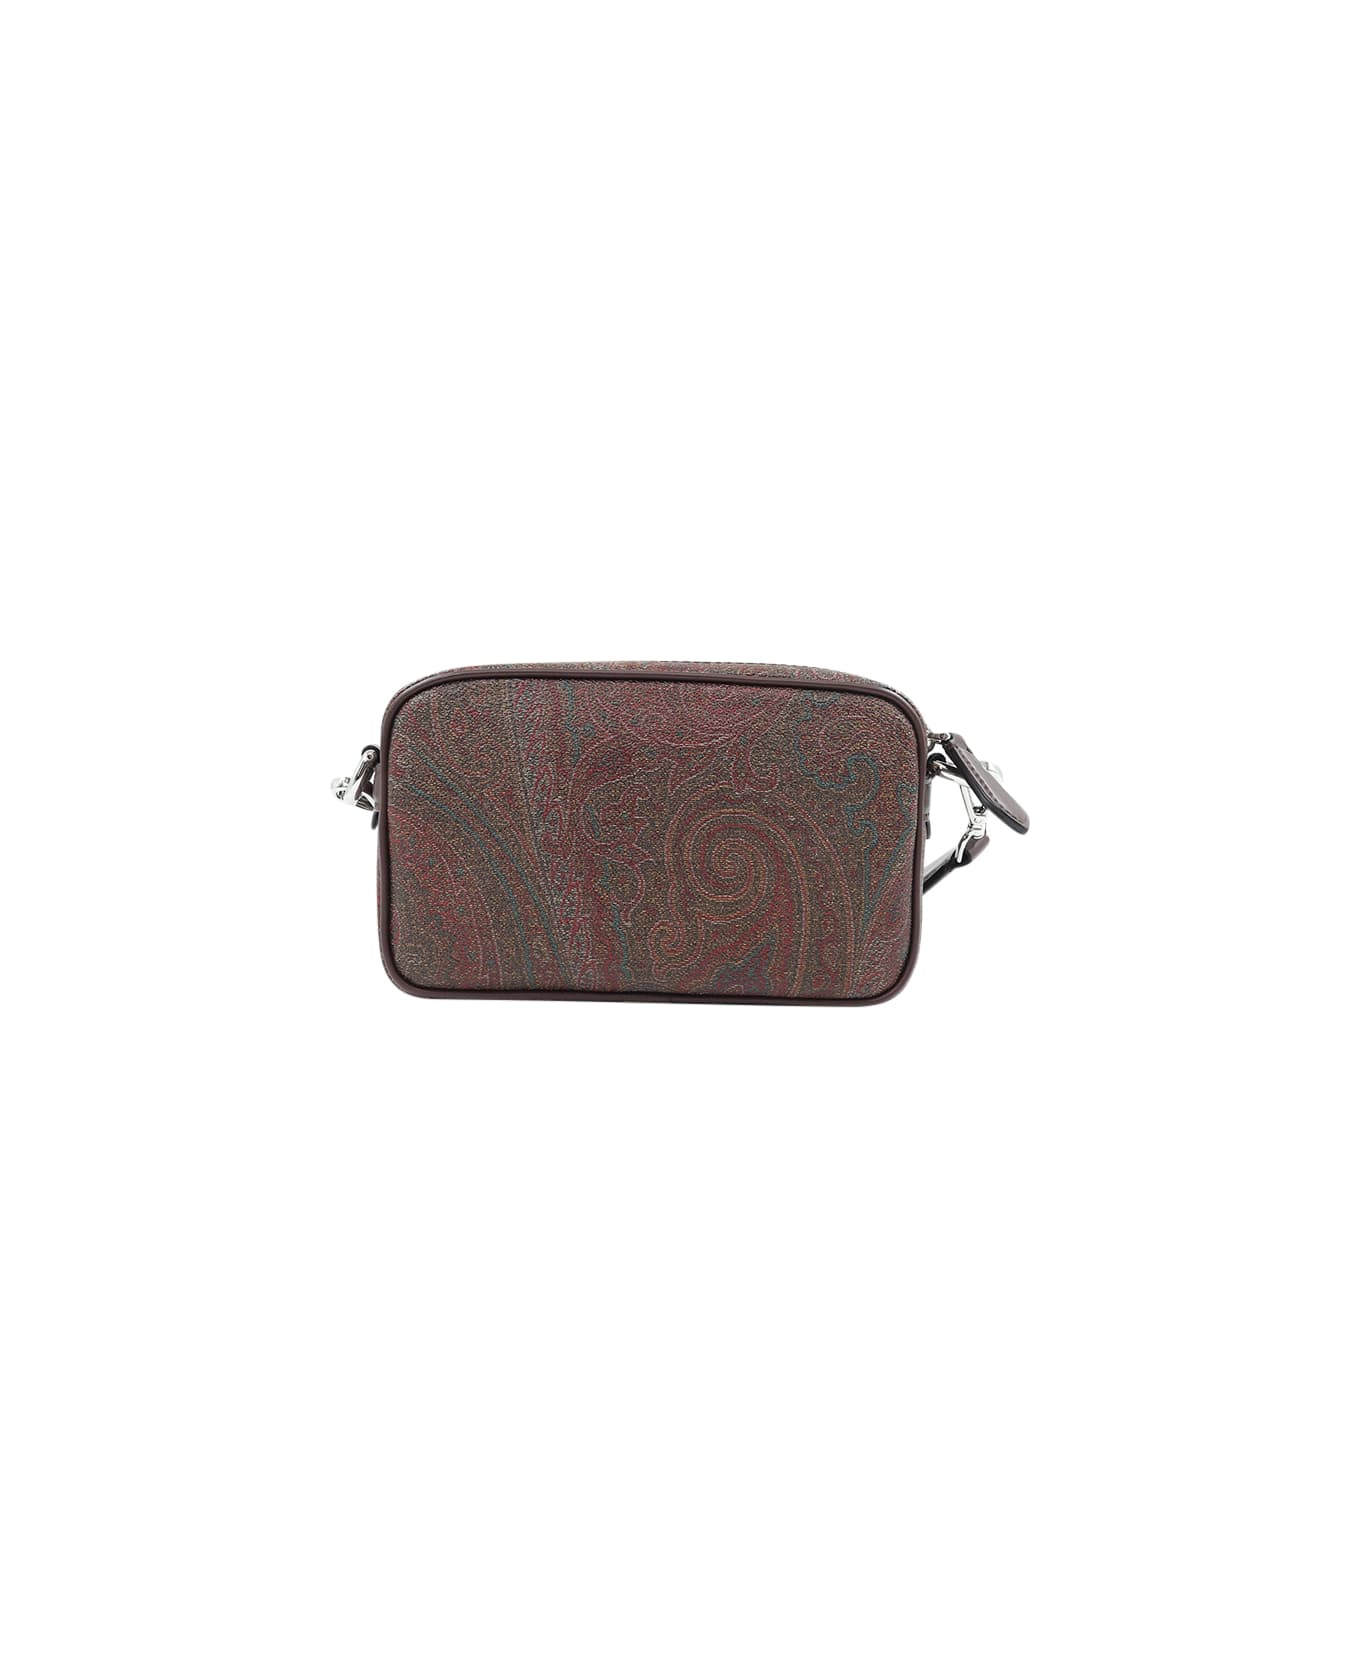 Etro Paisley Mini Bag In Coated Canvas - Brown ショルダーバッグ